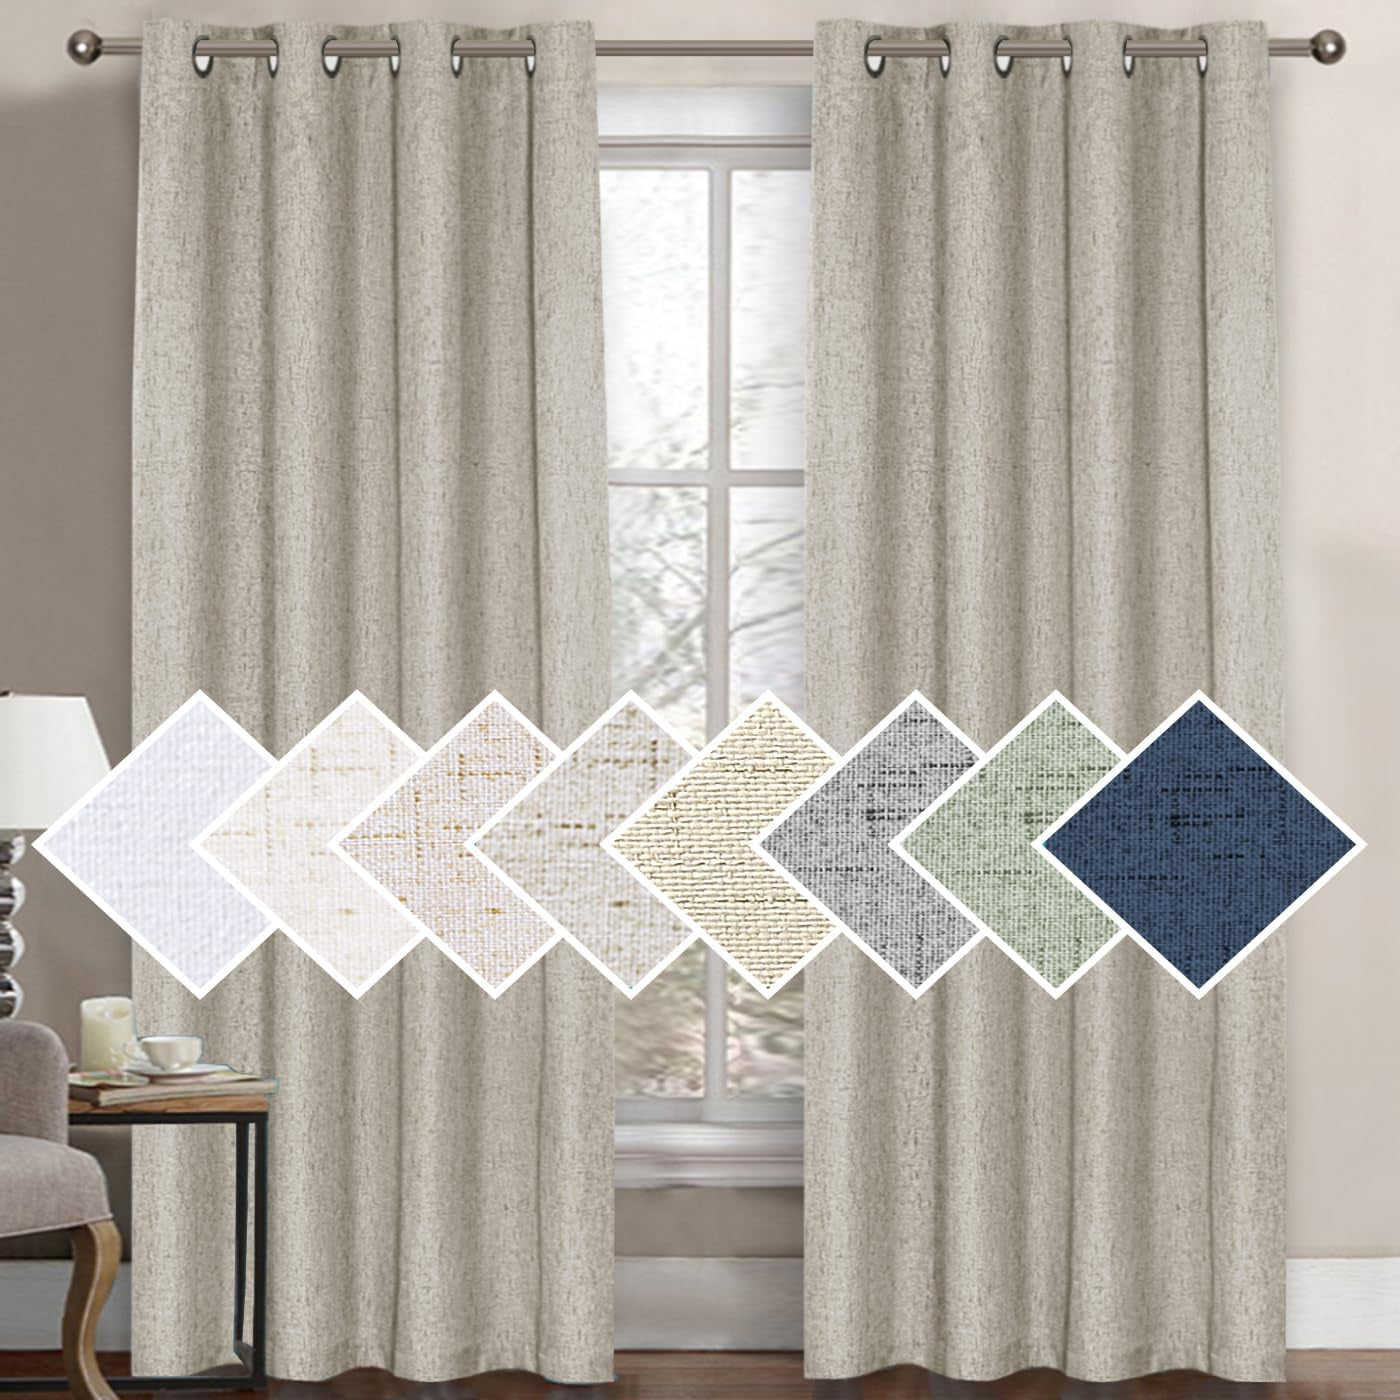 H.VERSAILTEX 100% Blackout Curtains for Bedroom Thermal Insulated Linen Textured Curtains Heat and Full Light Blocking Drapes Living Room Curtains 2 Panel Sets, 52X84 - Inch, Natural  H.VERSAILTEX Stone 1 Panel - 52"W X 96"L 